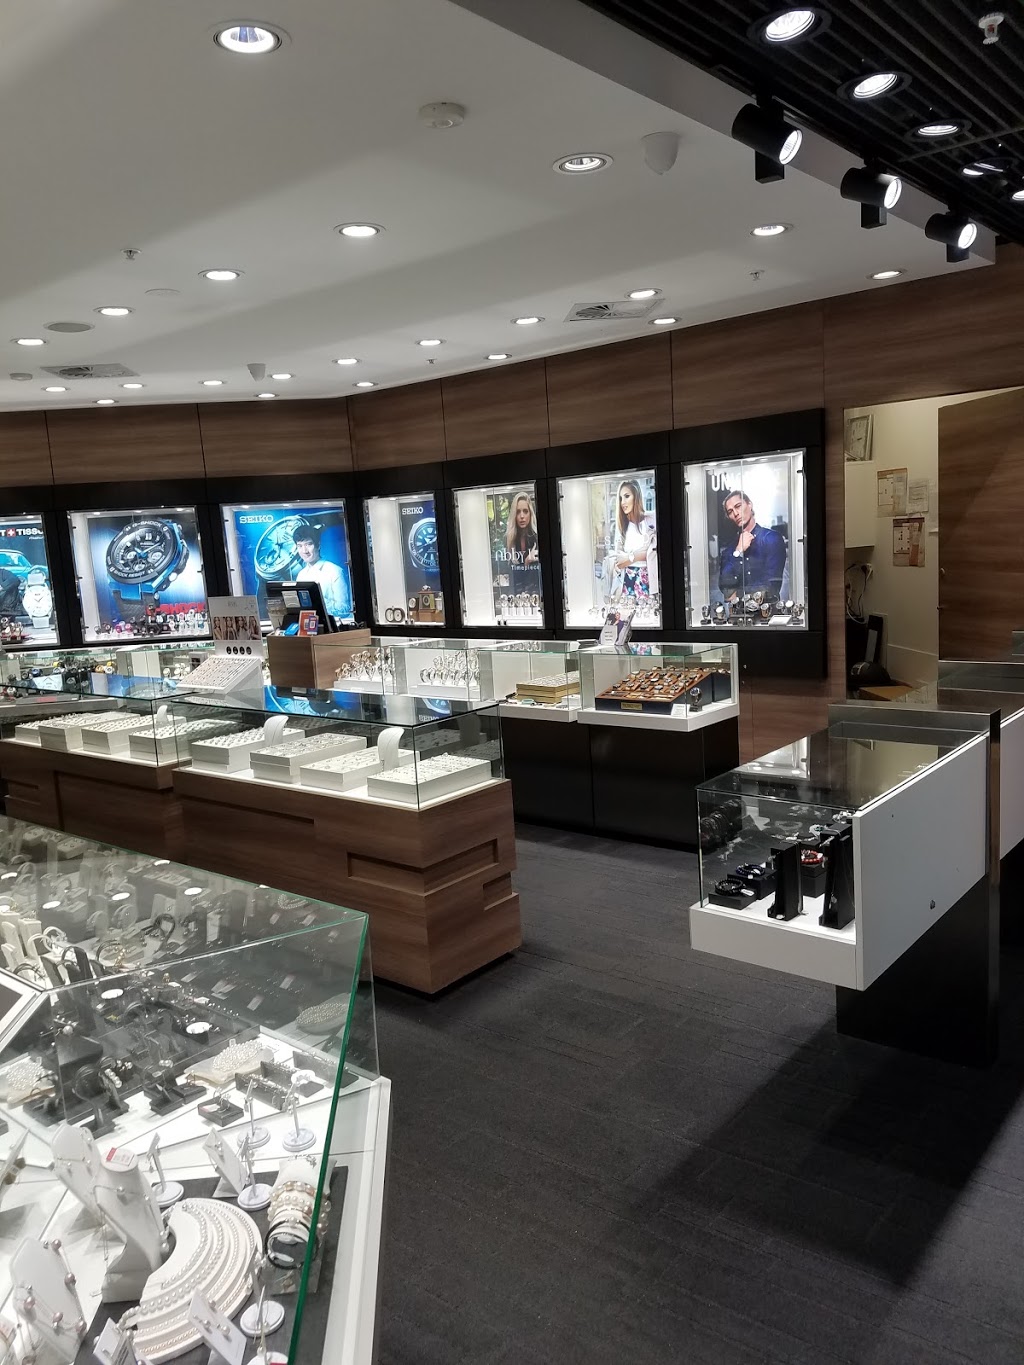 Harbourside jewellers | jewelry store | Harbourside Shopping Centre Darling Drive Shop 173-175, Sydney NSW 2000, Australia